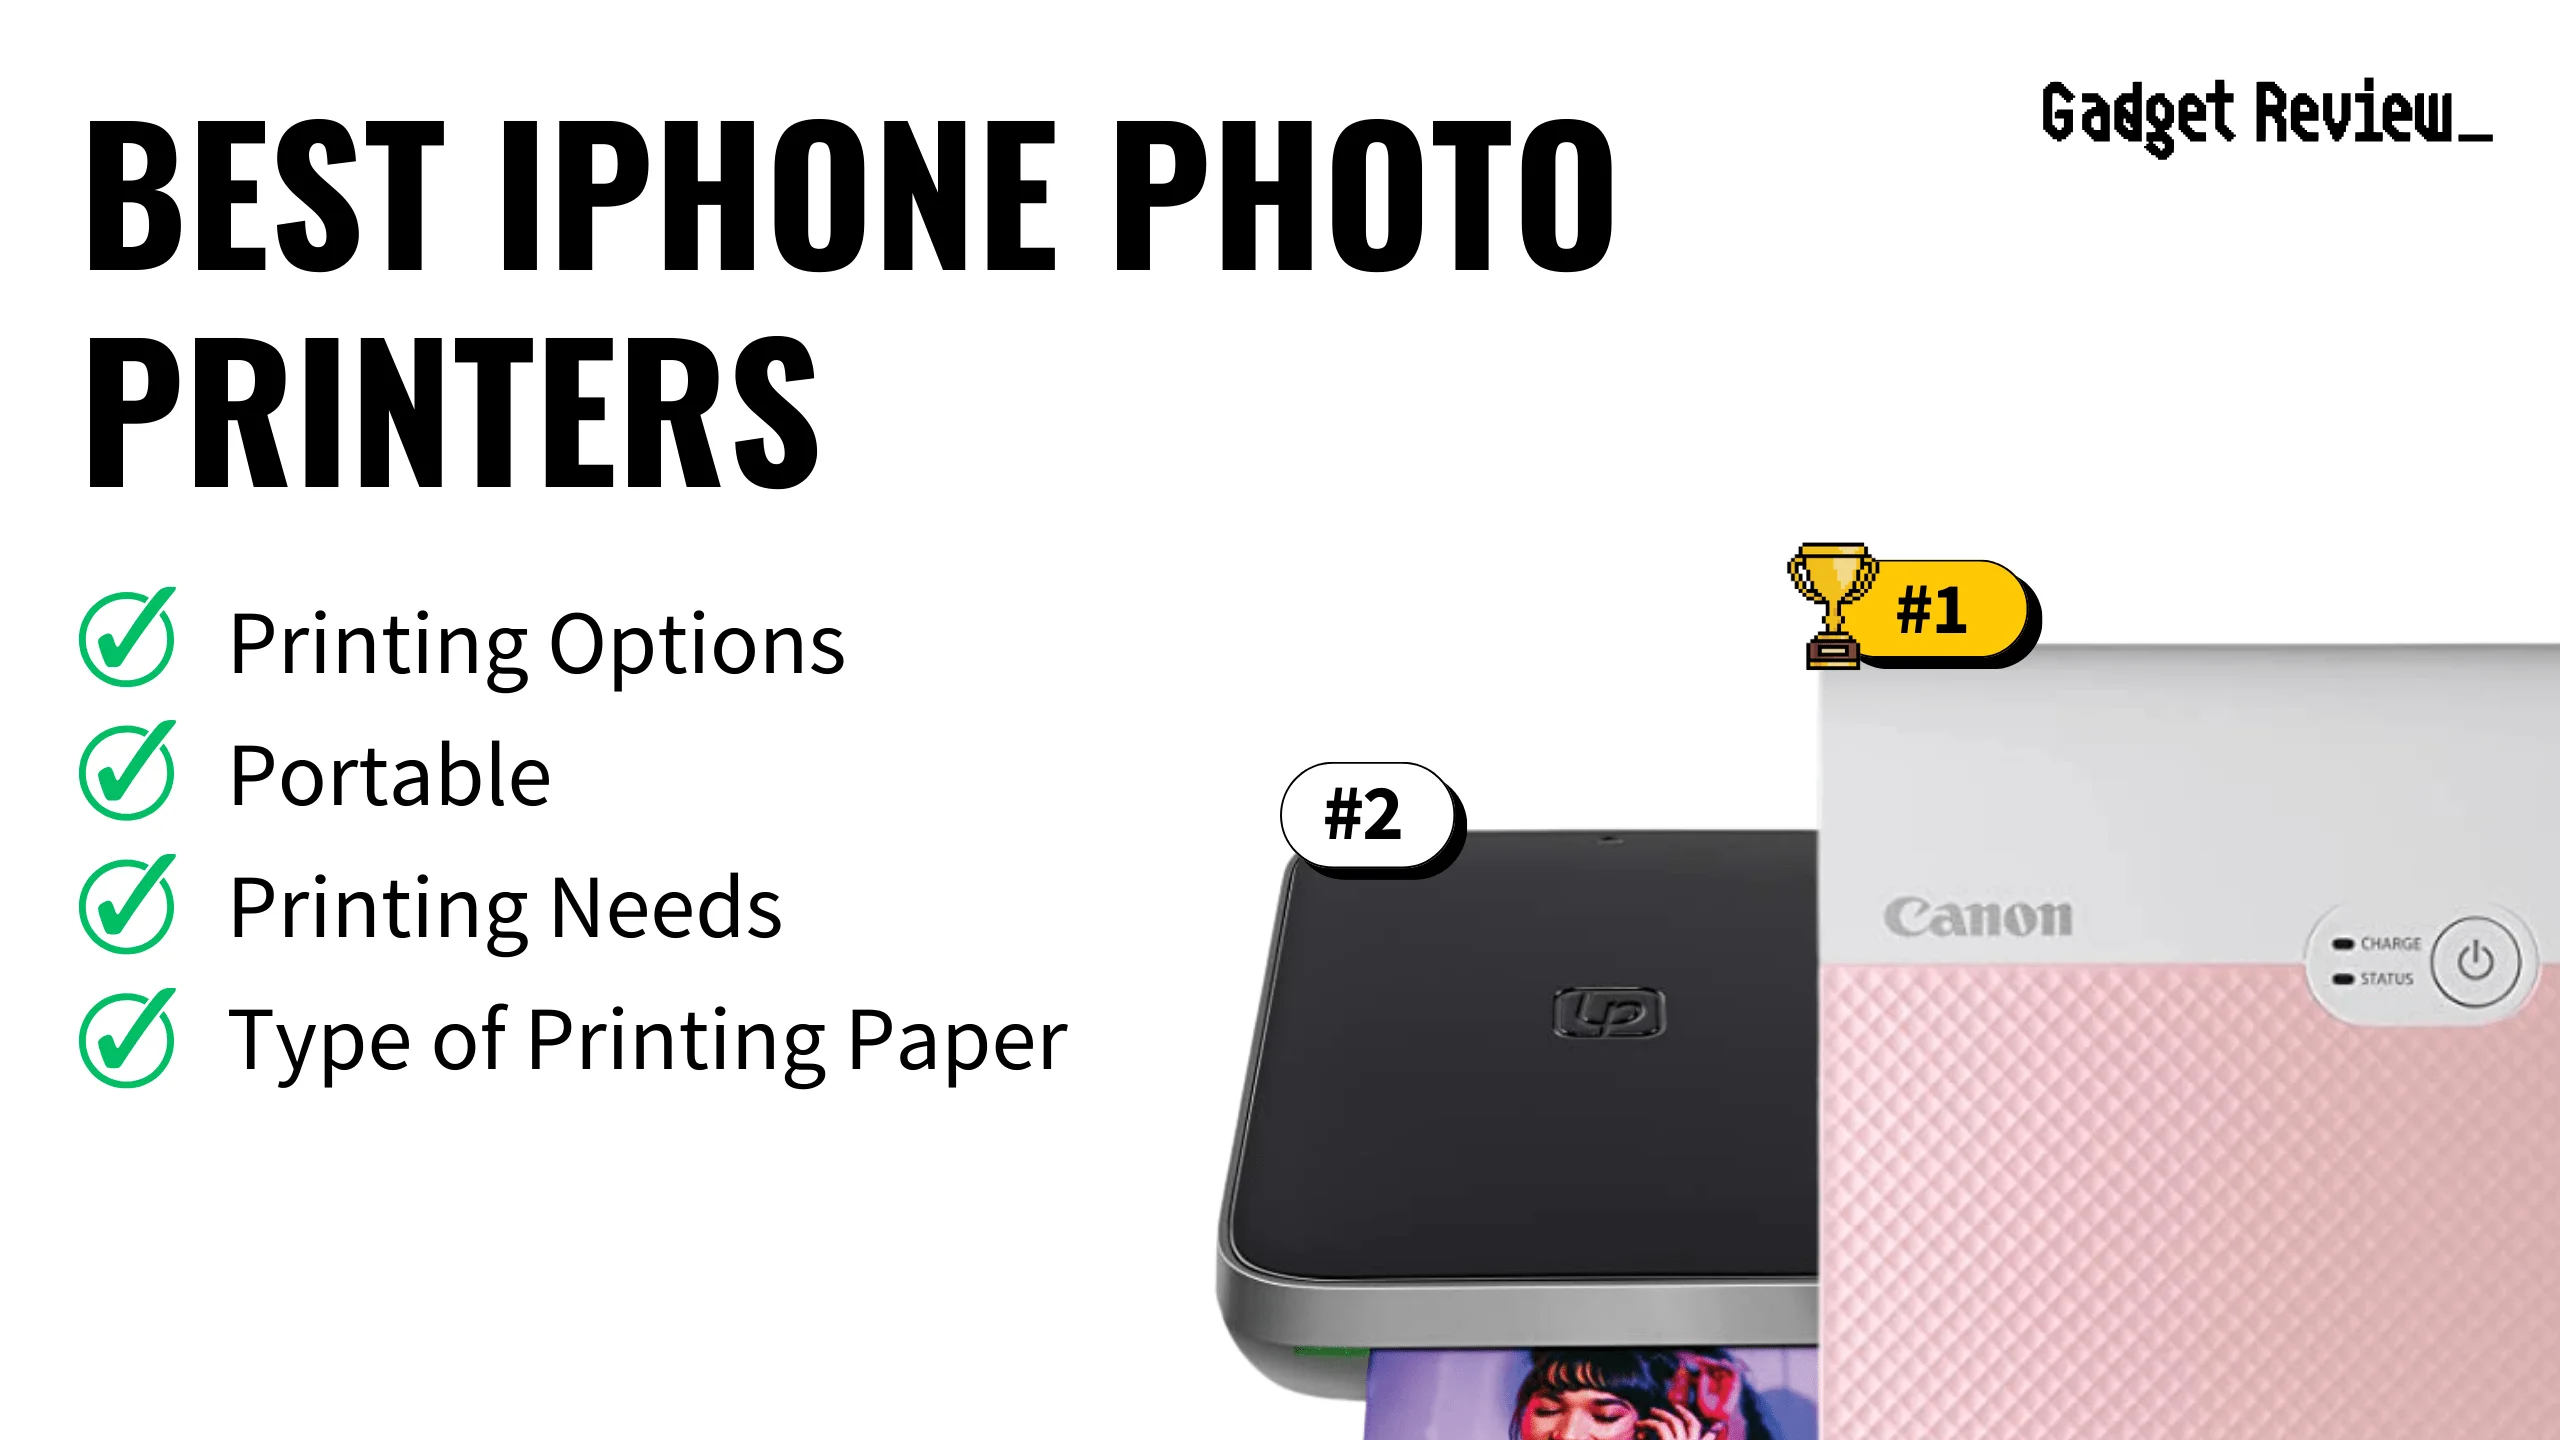 best iphone photo printer featured image that shows the top three best printer models